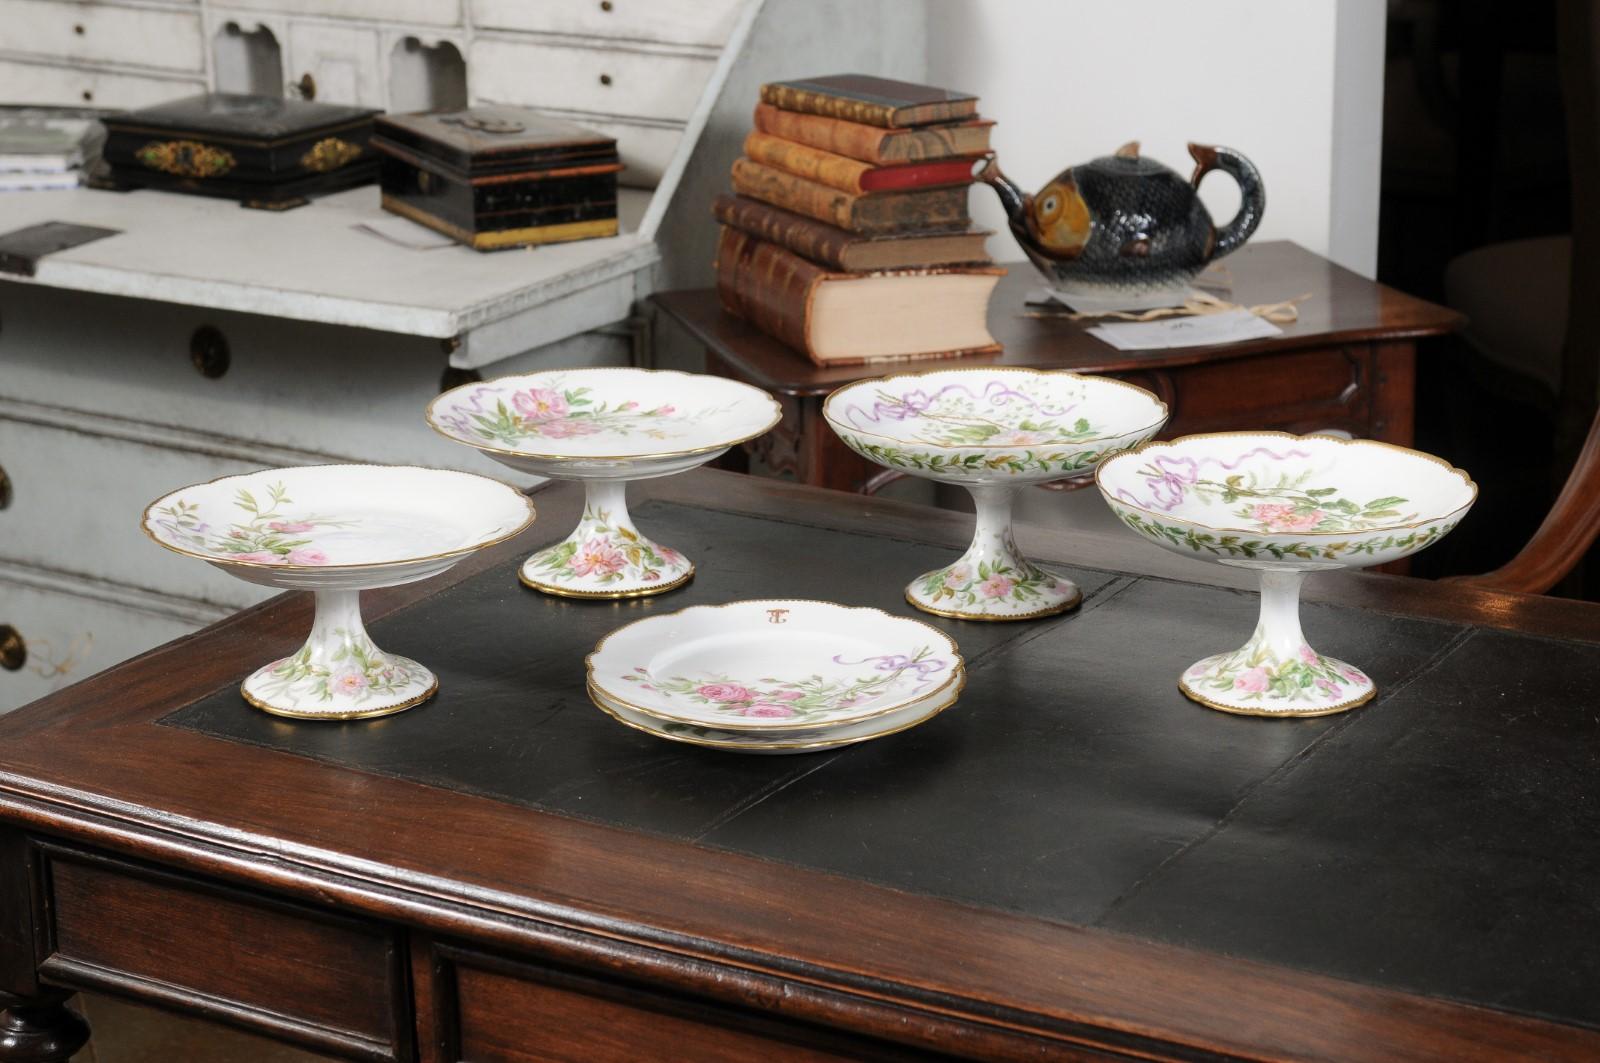 English porcelain compotes and plates from the 20th century, with floral décor and gilded trim, priced and sold $275 individually. Attracting our attention with their lovely silhouettes and delicate décor, each of these serving pieces features a